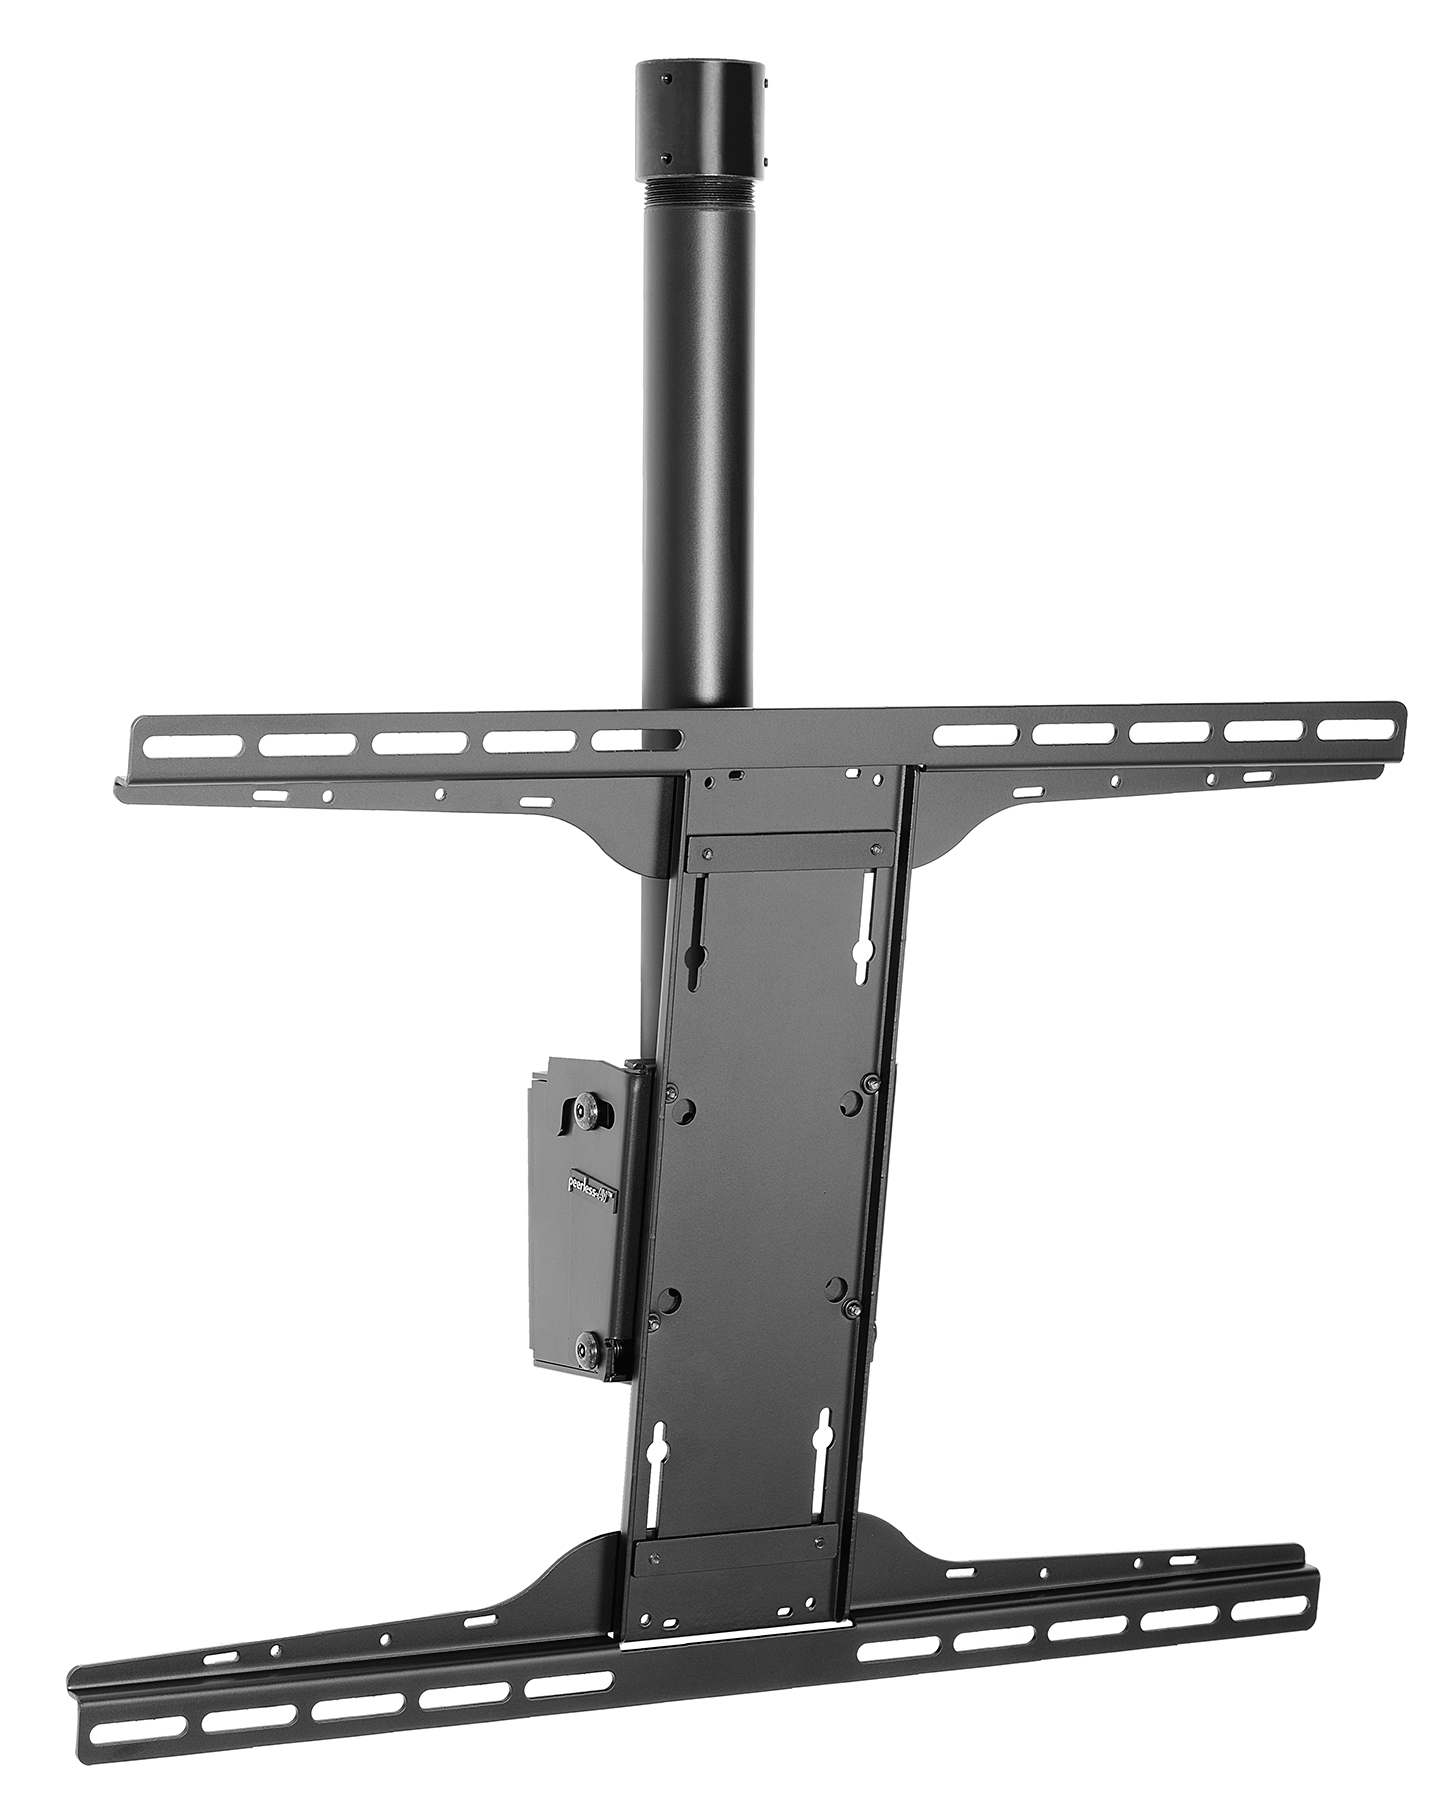 PLCK-UNL SmartMount Ceiling Mount with 1.5" NPS Coupler and Universal I-Shaped Adaptor for 32” to 90” Displays